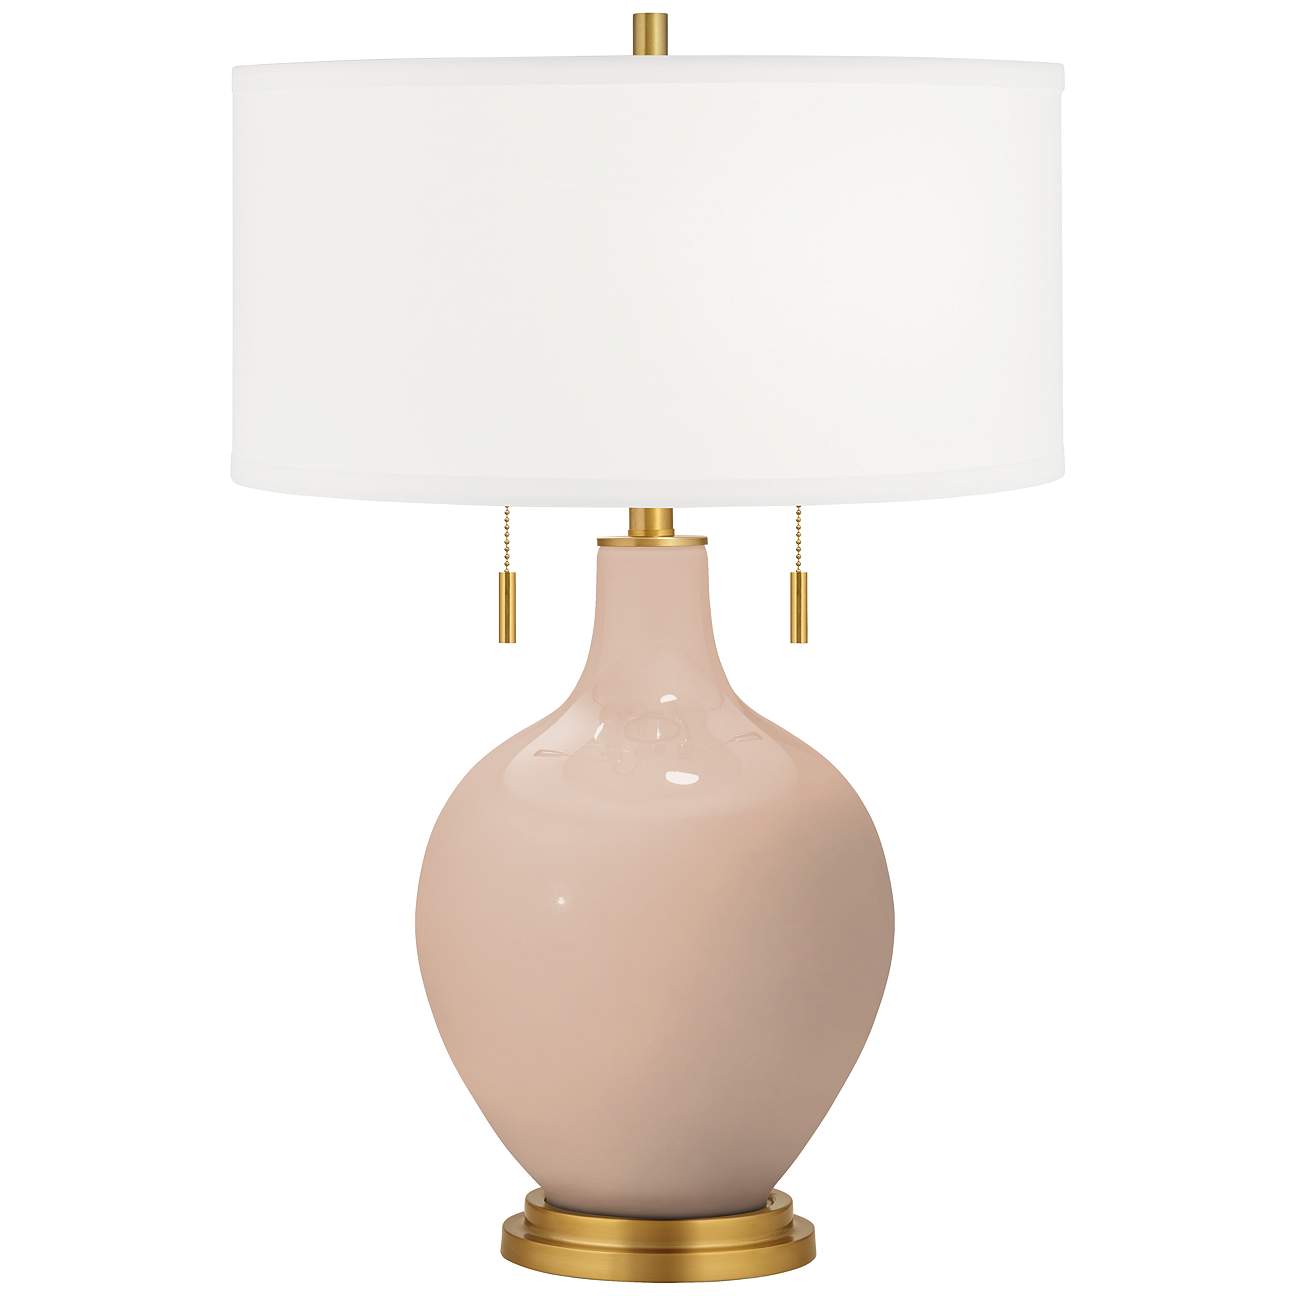 Italian Coral Toby Brass Accents Table Lamp - #641A6 | Lamps Plus